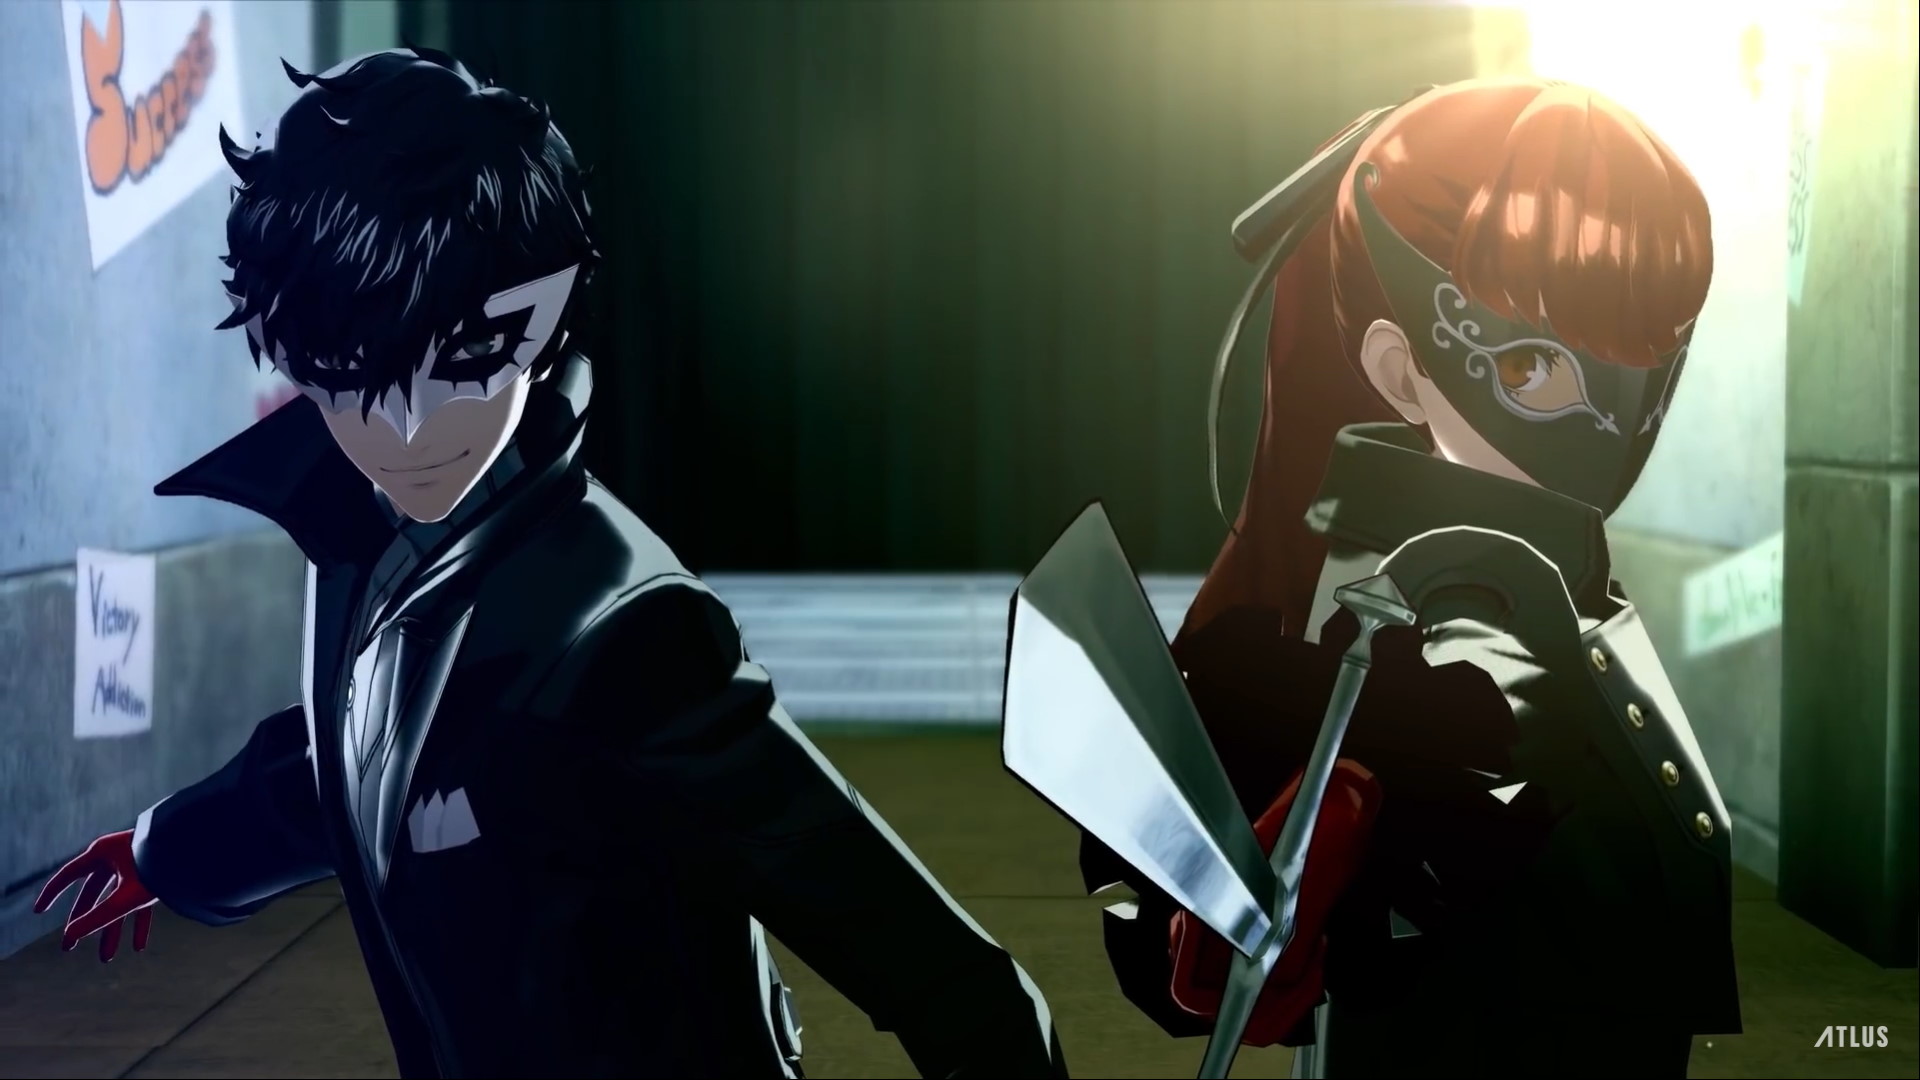 Critically Acclaimed JRPG, Persona 5 Royal is out soon by next week ...